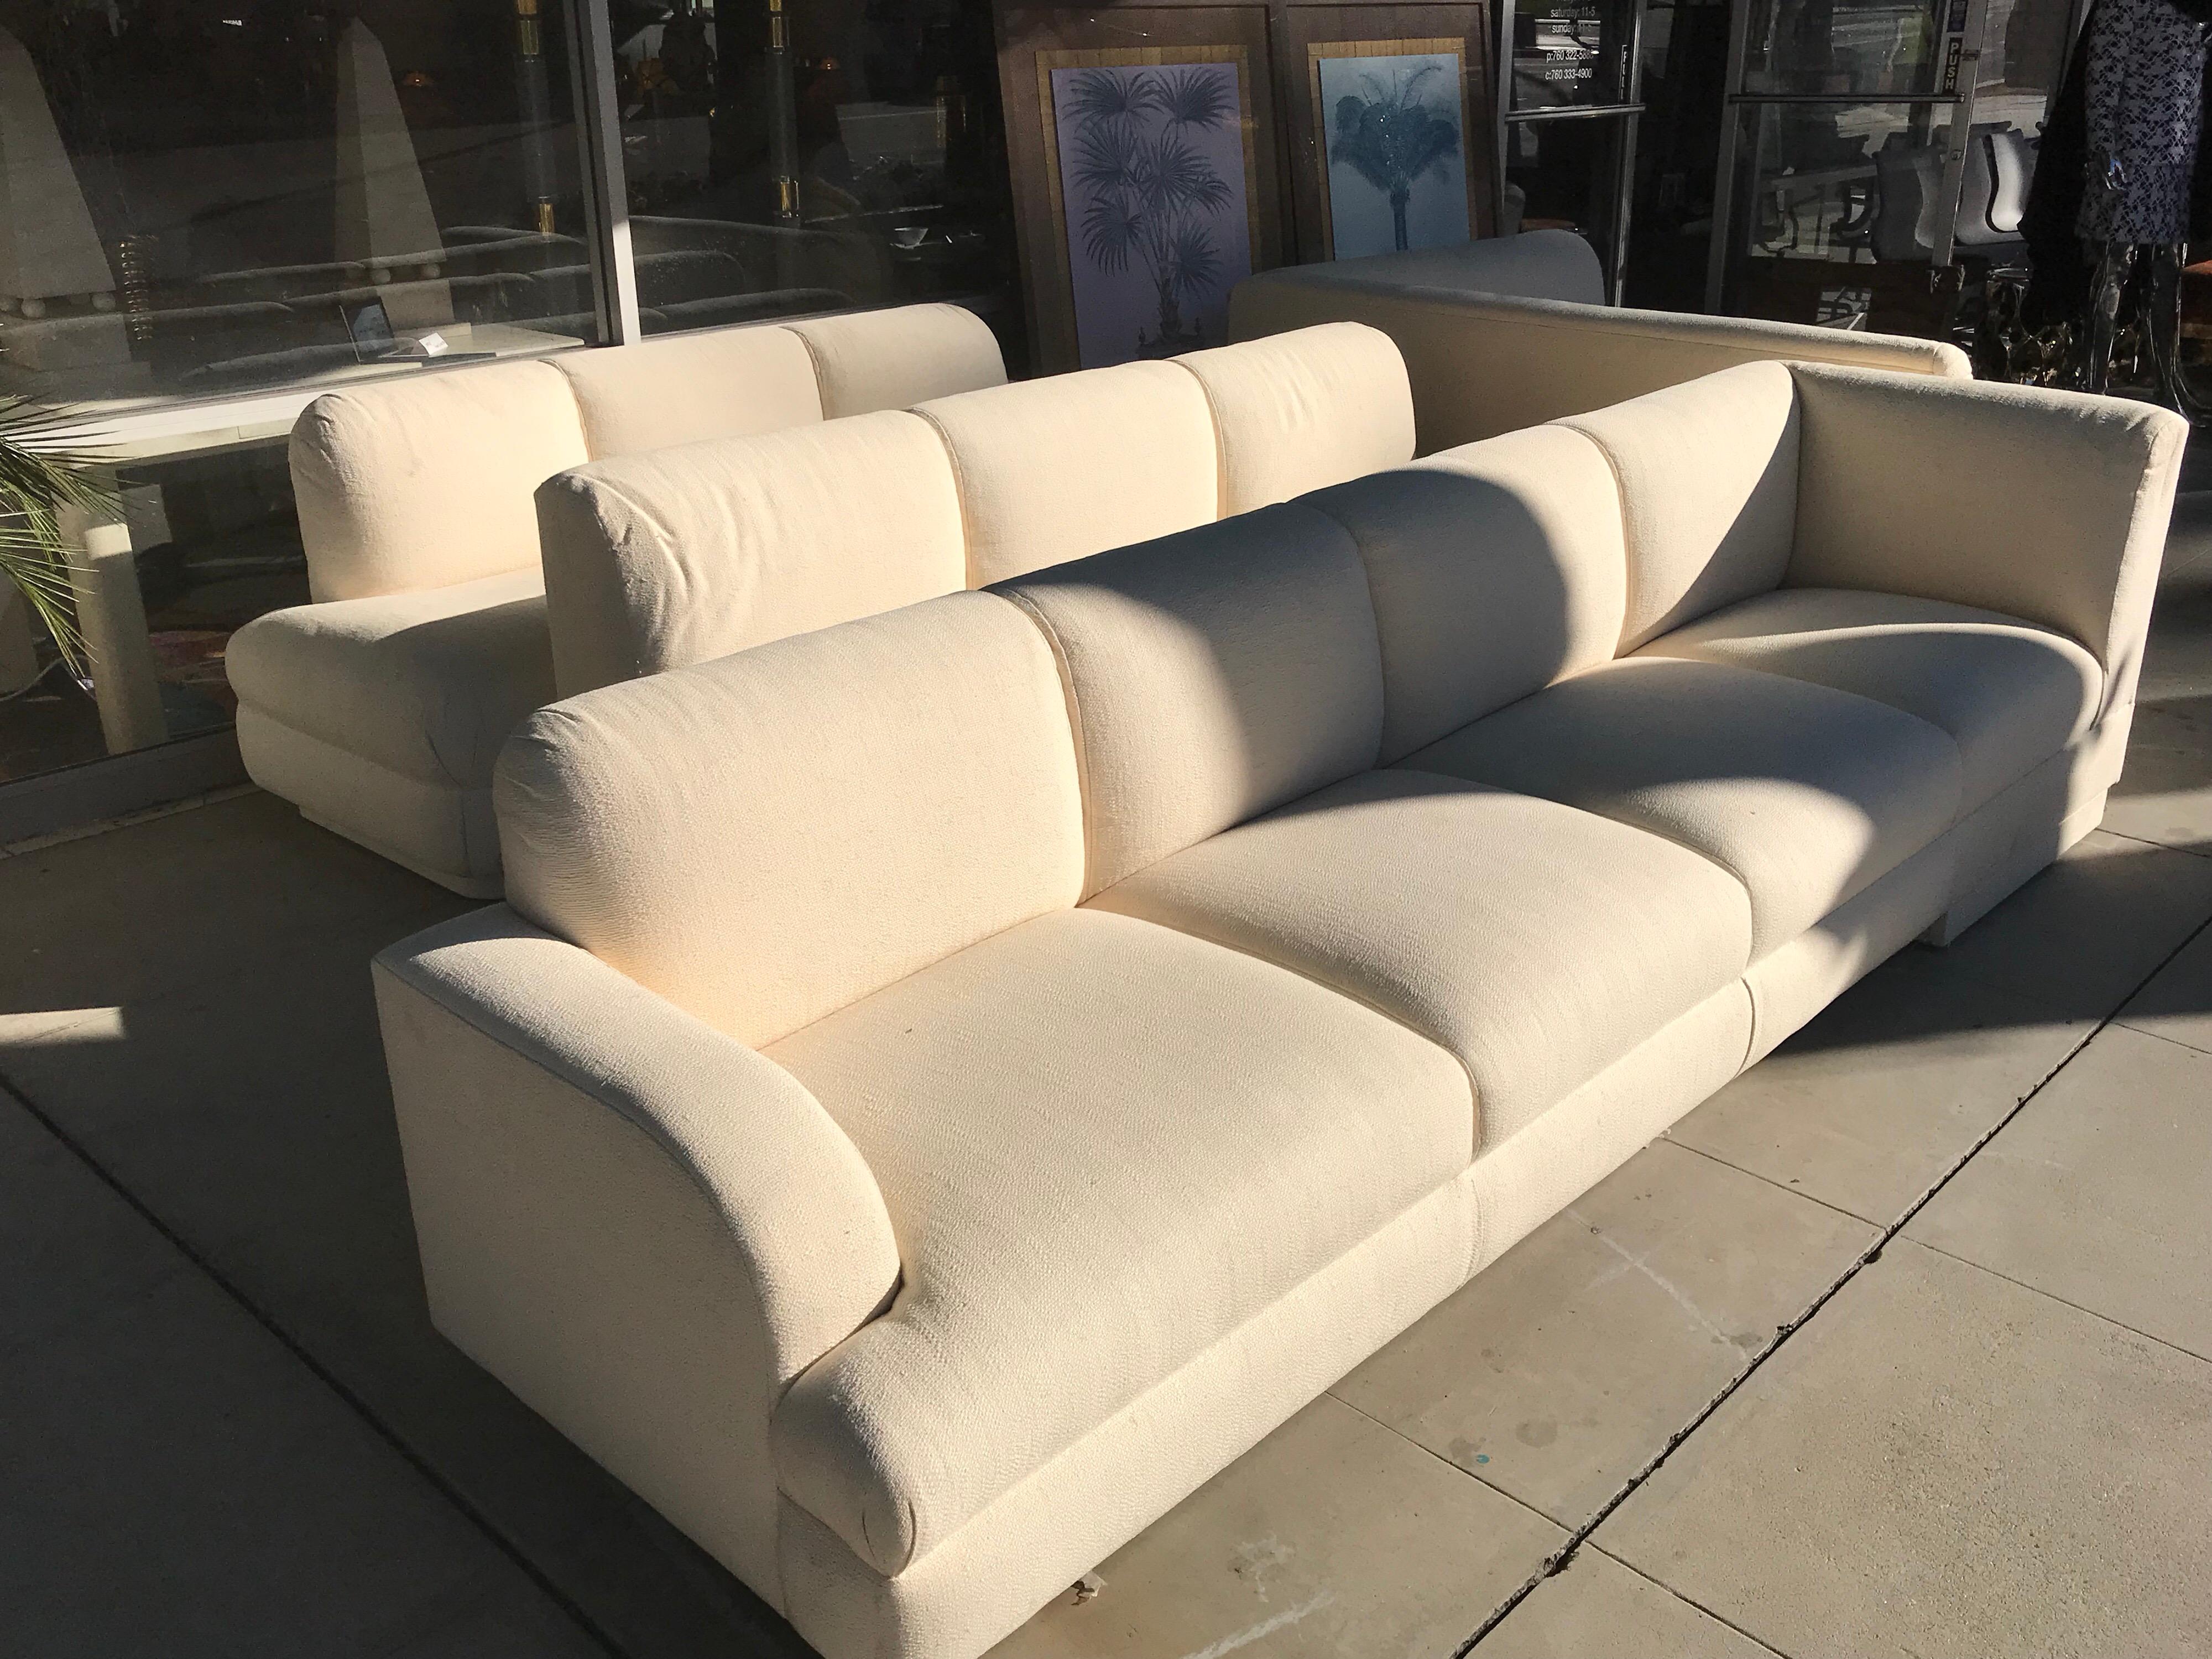 Hand-Crafted Large 2-Piece Sectional Vintage Modern Sofa by A. Rudin for Steve Chase Estate